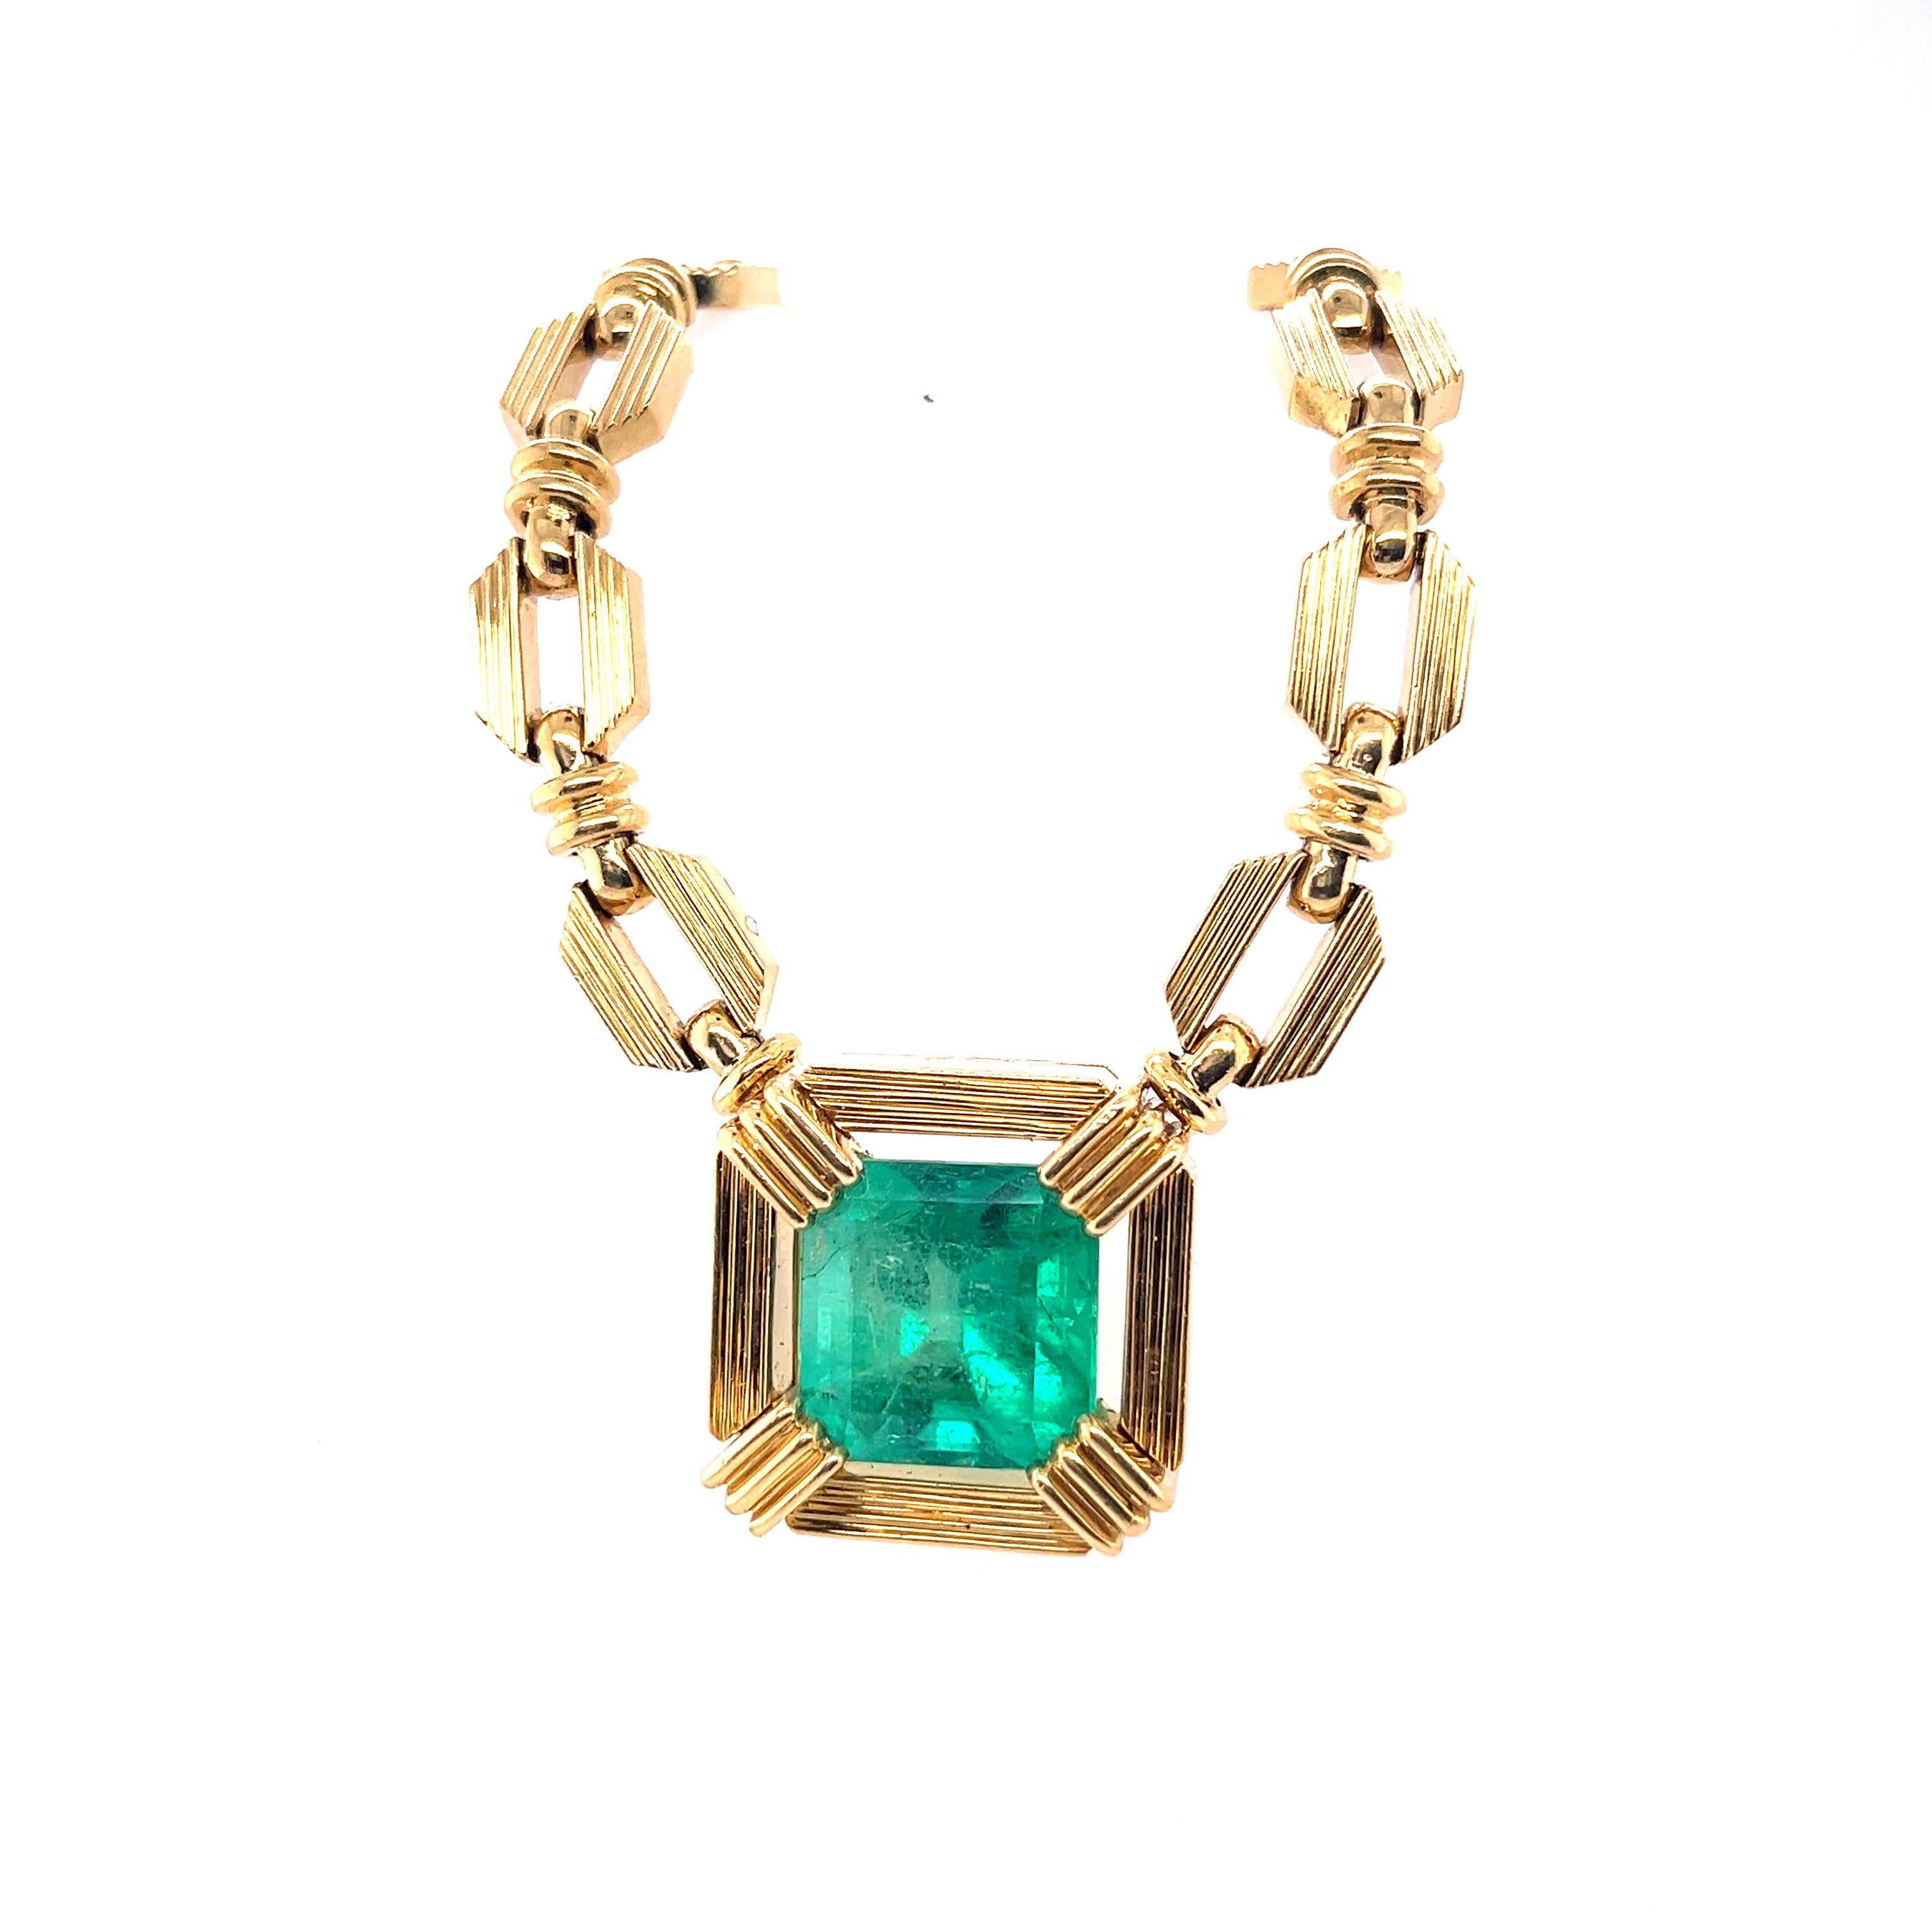 The prominent Polish-American designer, Henry Dunay, fashioned this 19.48 carat Colombian Emerald set in 18 karat solid yellow gold. The Emerald radiates vibrant vivid green color hues. At almost 20 carats, an Emerald of this size to have such